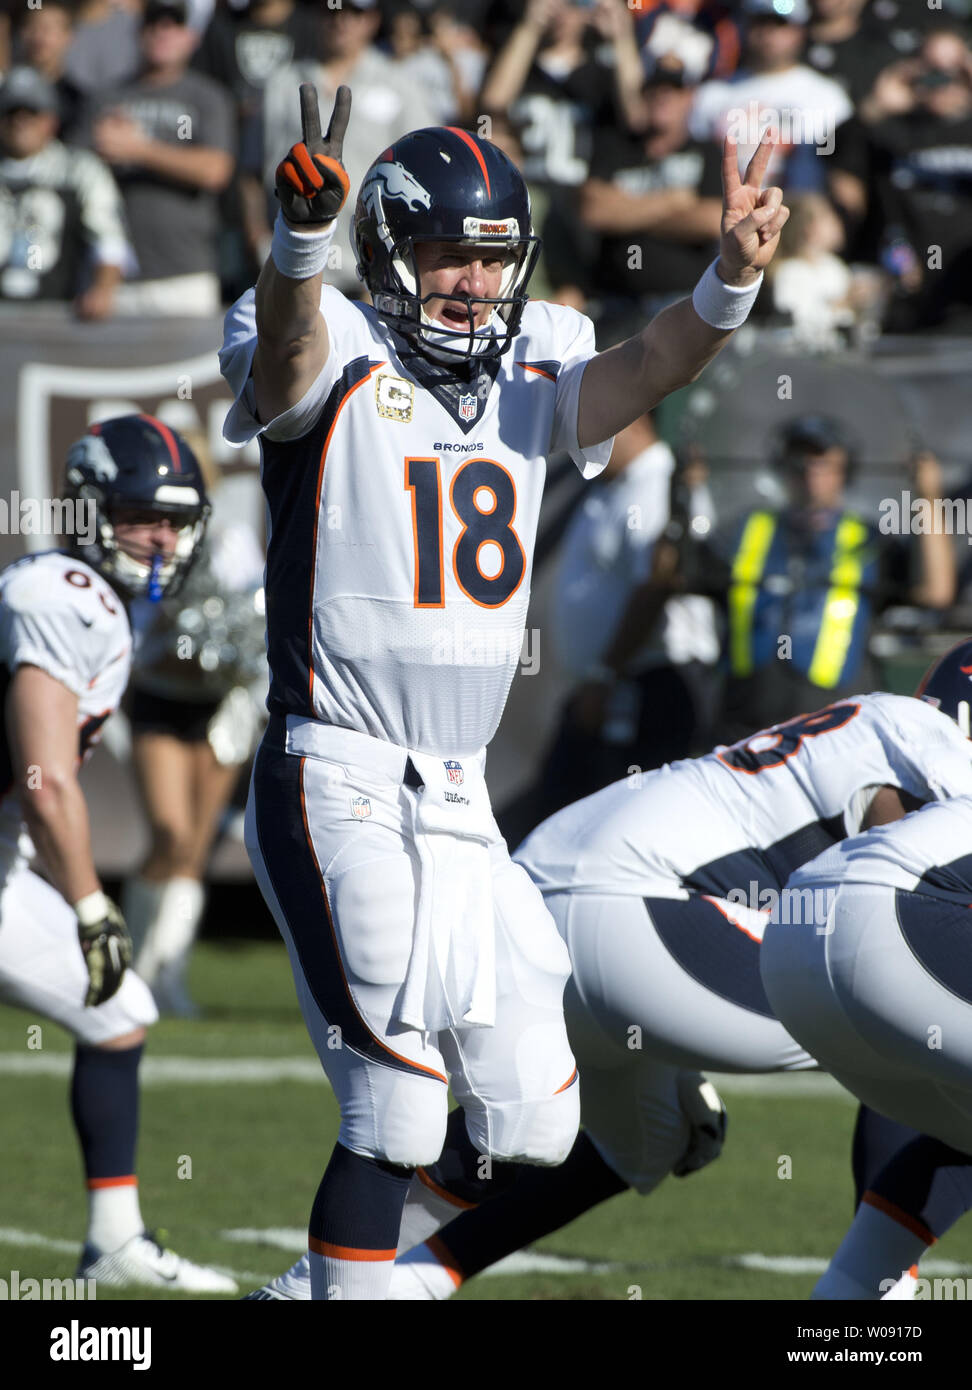 Denver Broncos Peyton Manning (18) calls out a play against the Oakland Raiders in the first quarter at O.co Coliseum in Oakland, California on November 9, 2014. The Broncos defeated the winless Raiders 41-17.     UPI/Terry Schmitt Stock Photo